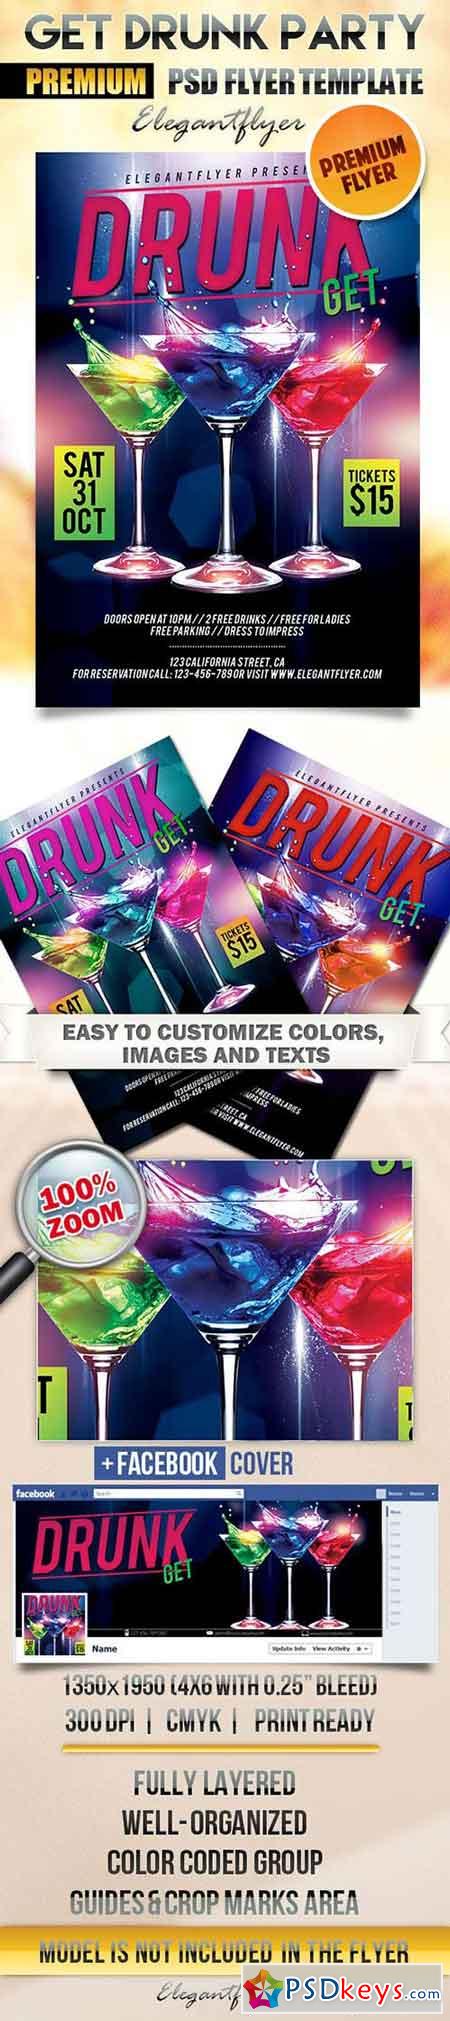 Get Drunk Party Flyer PSD Template + Facebook Cover